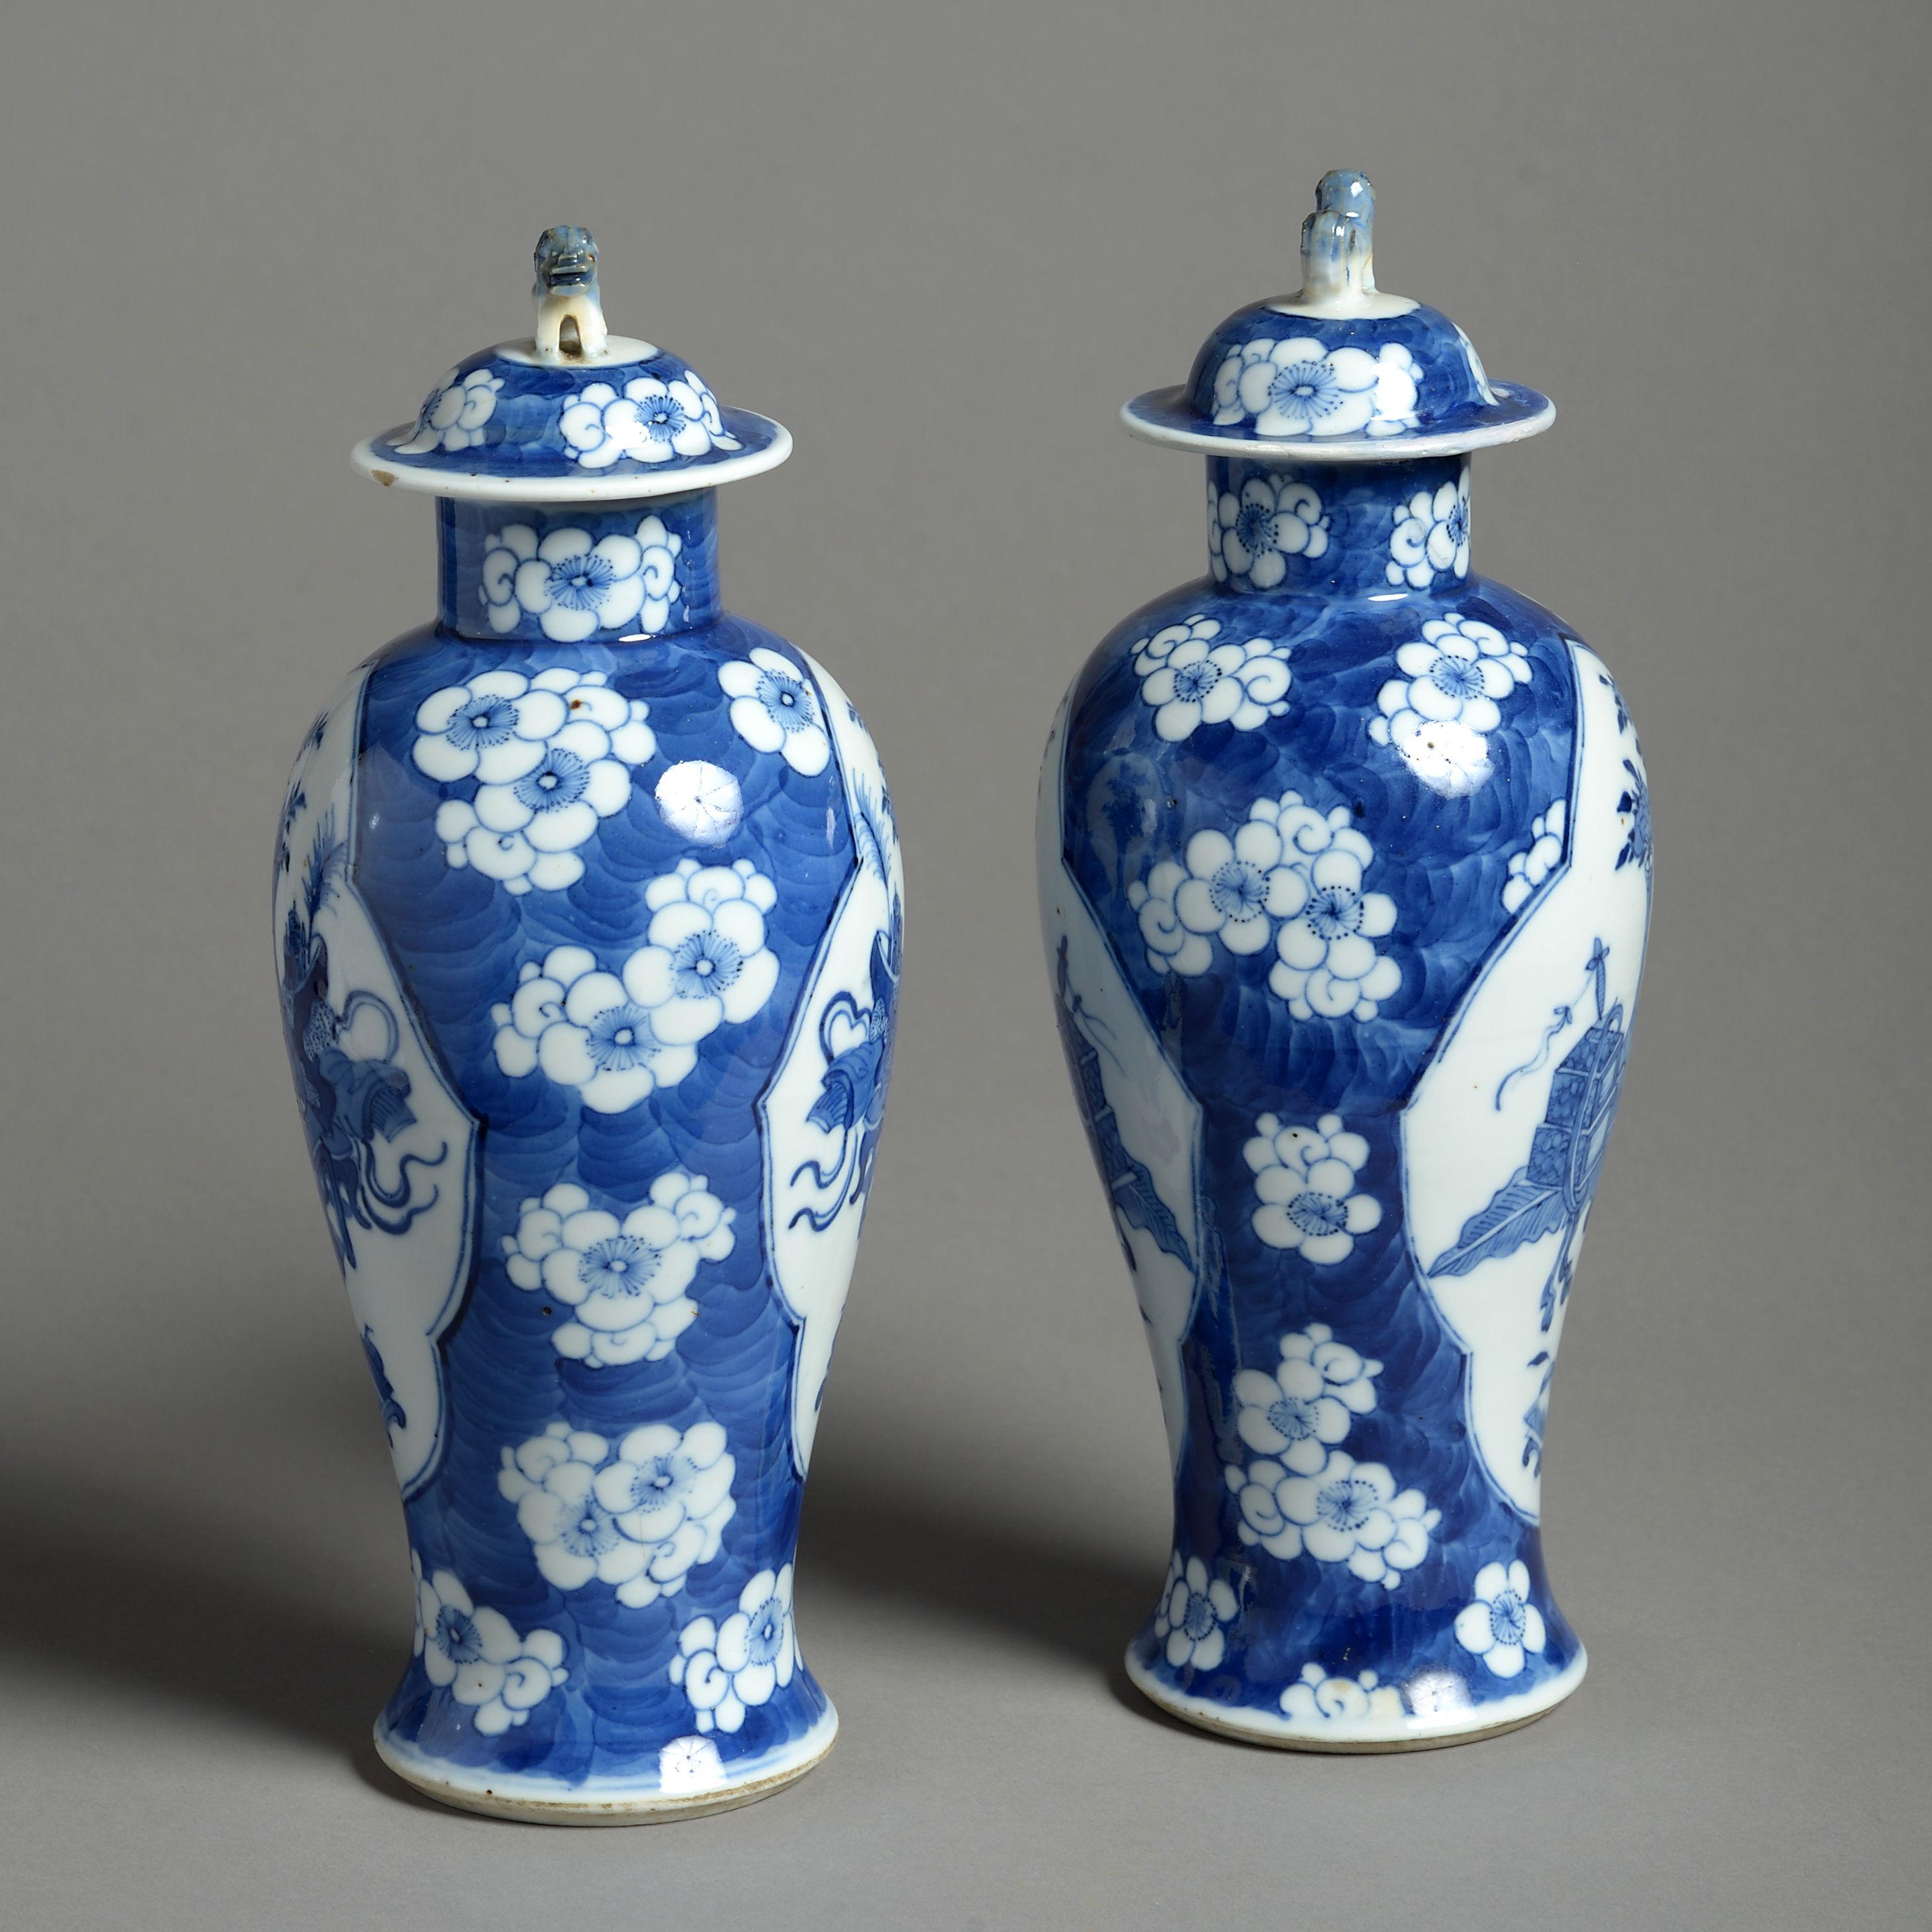 A pair of 19t century porcelain vases and covers, both decorated with the hundred antiques motif, within cartouches, set upon a ground of prunus blossoms in blue and white glazes. 

circa 1860, China.